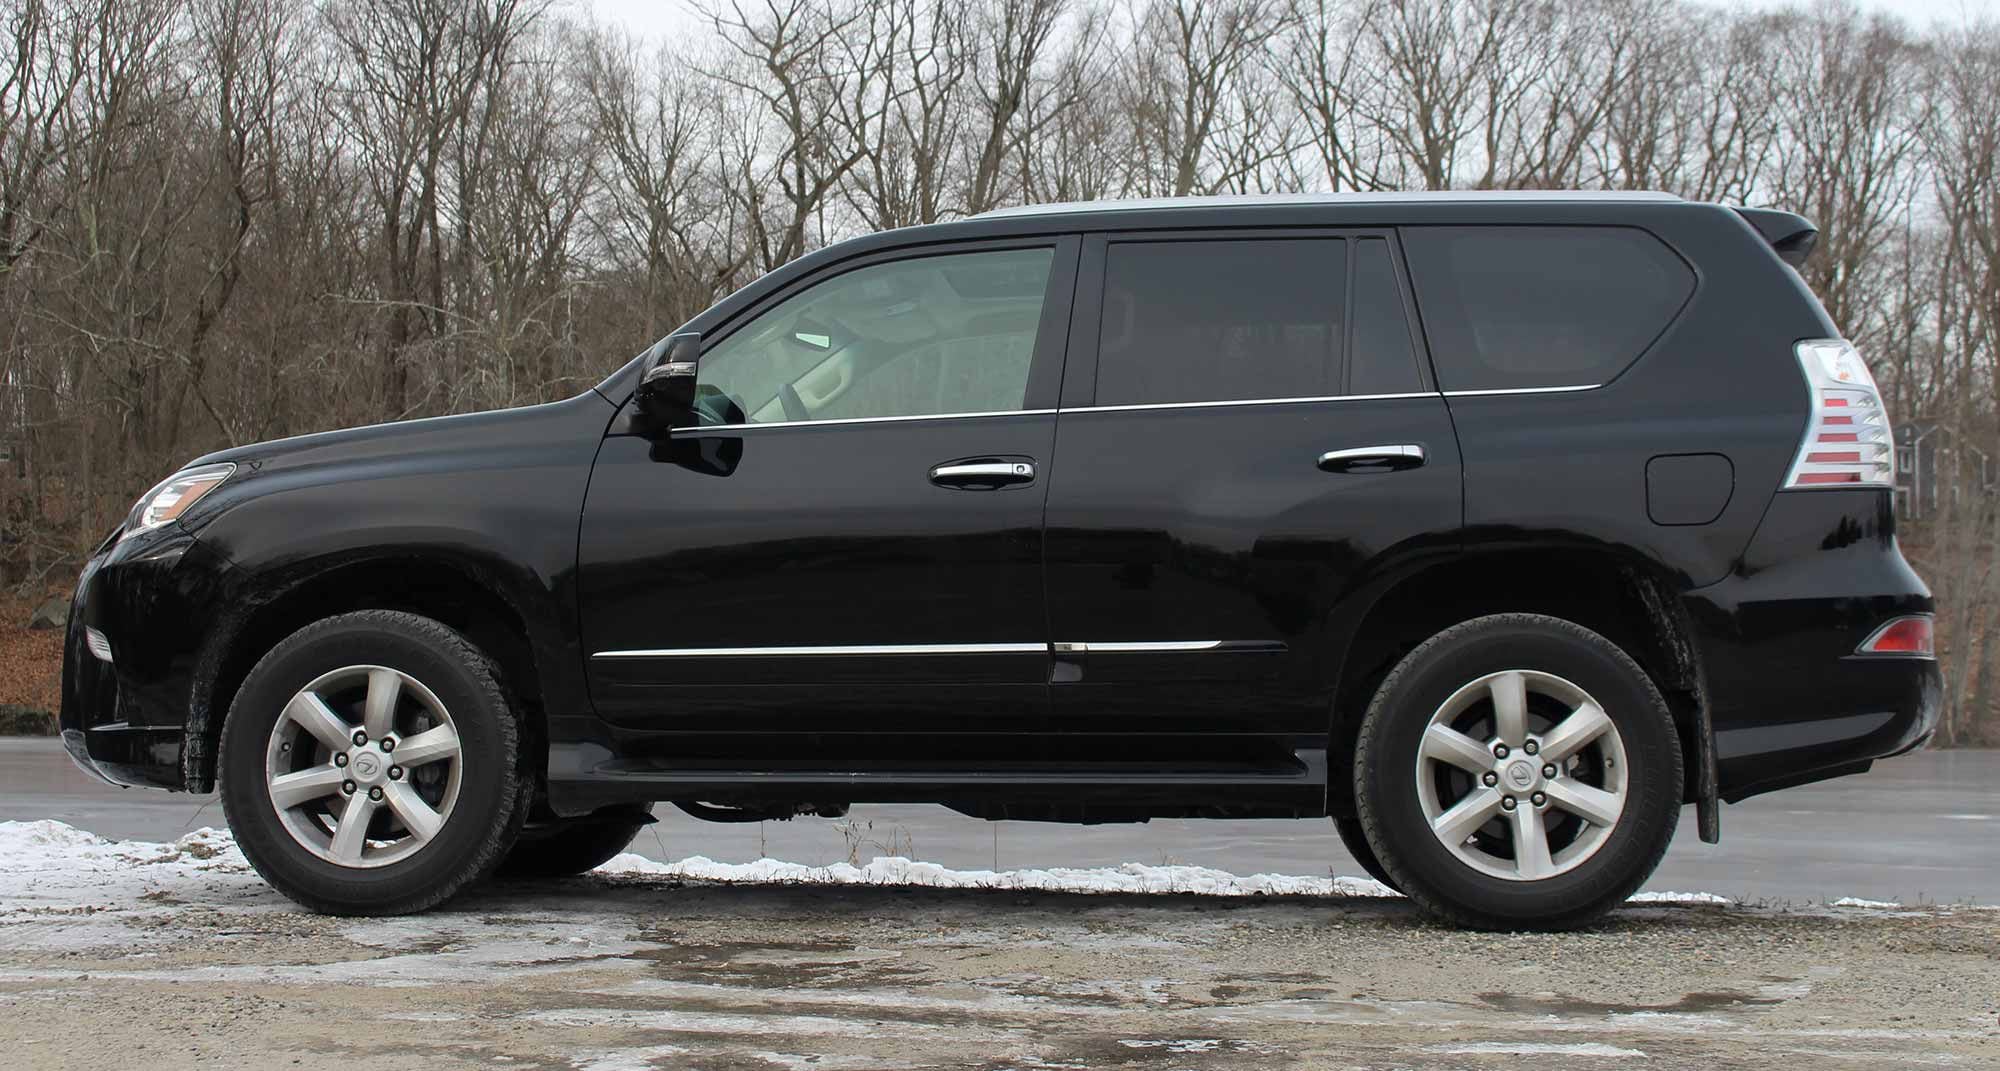 One test drive of this GX 460 changed everything when looking for a replacement for our Wrangler.